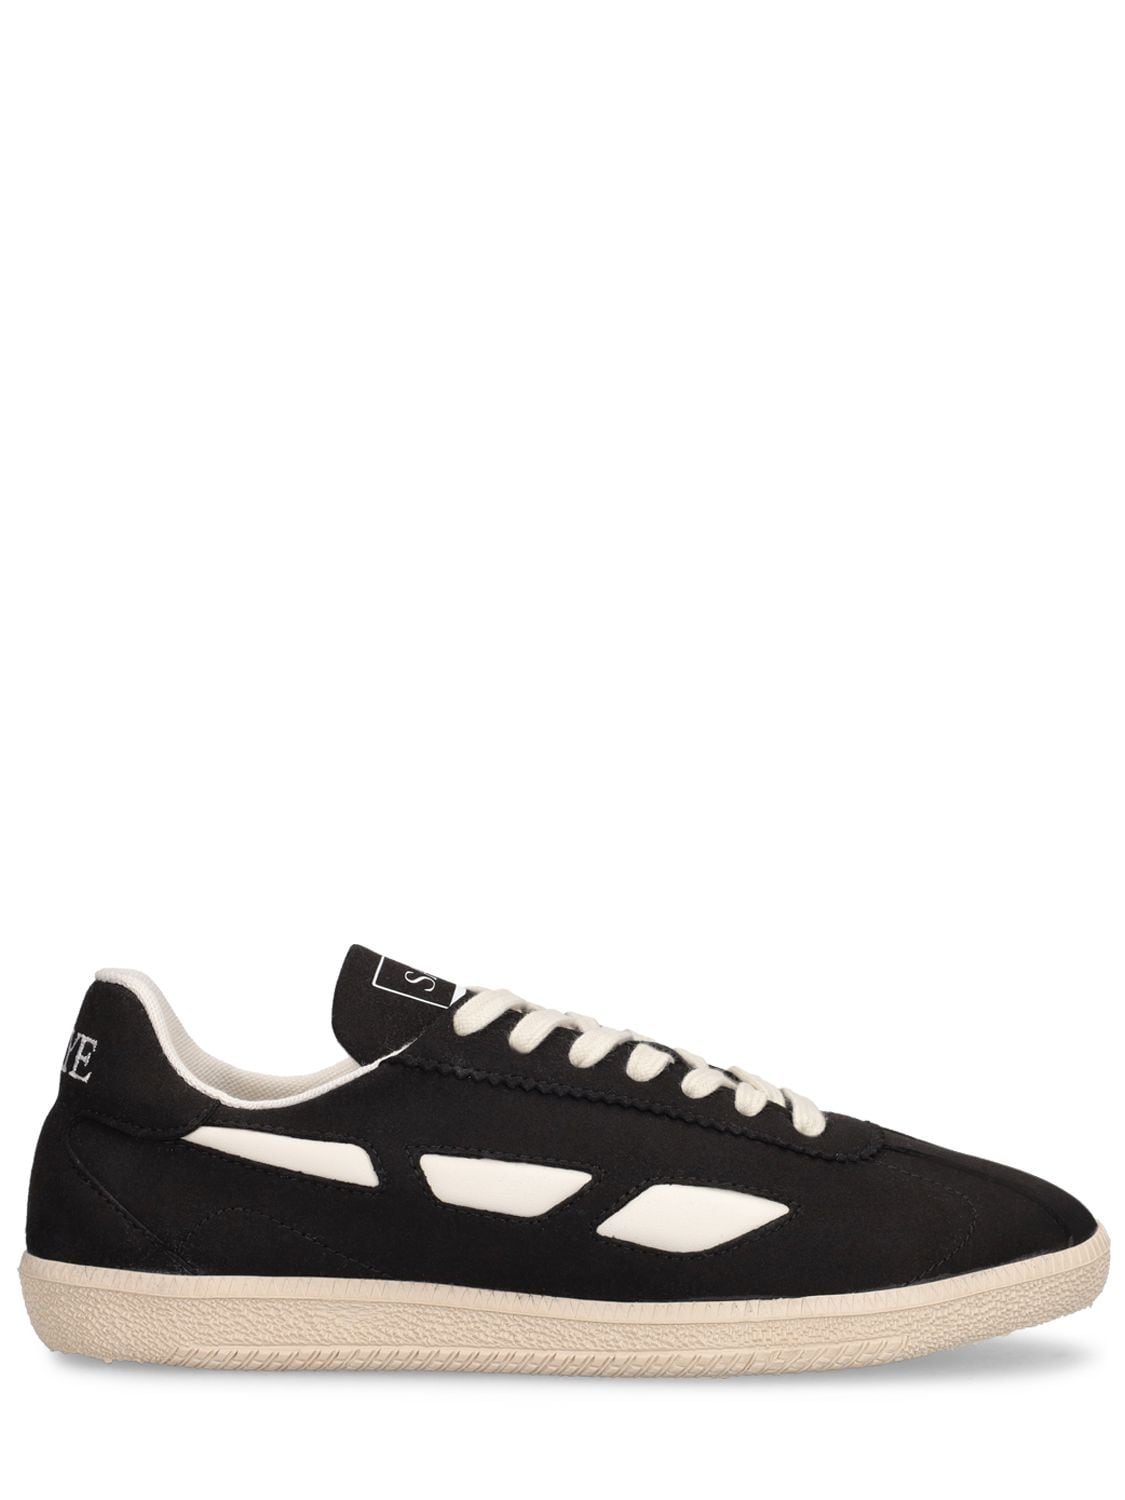 Saye Modelo '70 Vegan Trainers In Black At Urban Outfitters